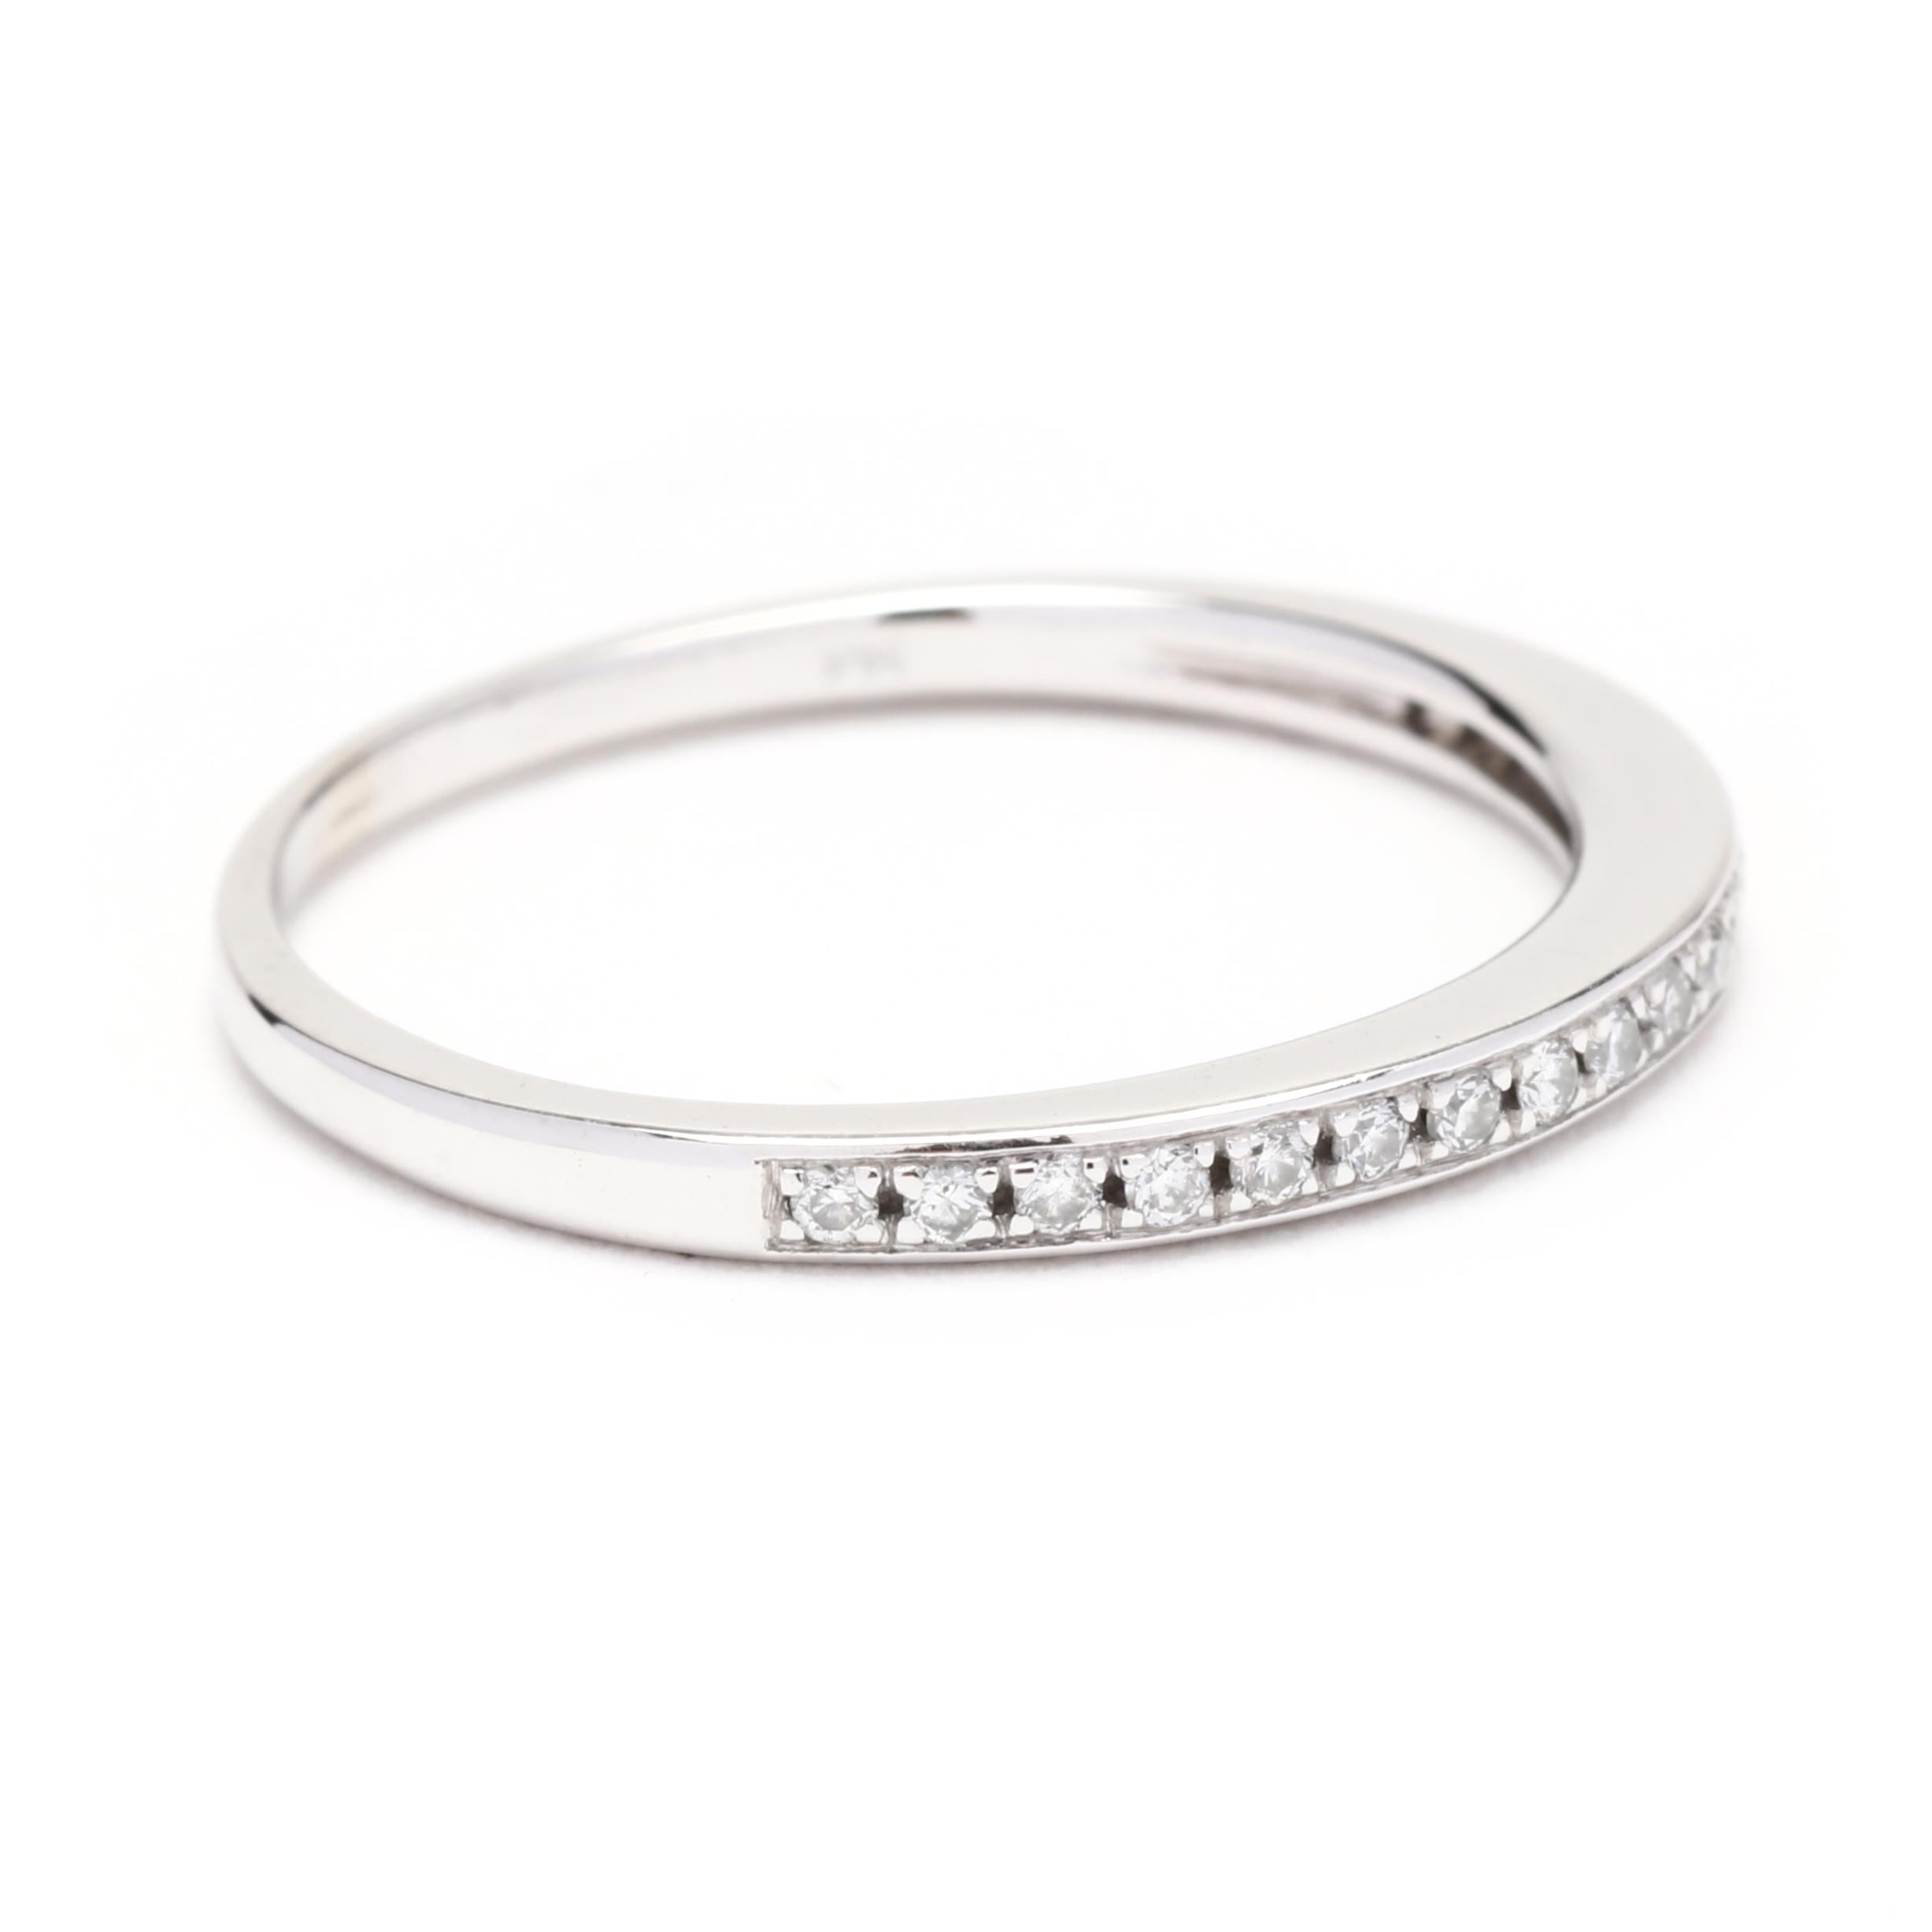 This elegant 0.20ctw thin diamond wedding band is a perfect addition to your wedding day. Crafted in 14K white gold, this thin stackable diamond ring will last a lifetime. Featuring 0.20 carats of diamonds in a petite row of sparkle, this ring is